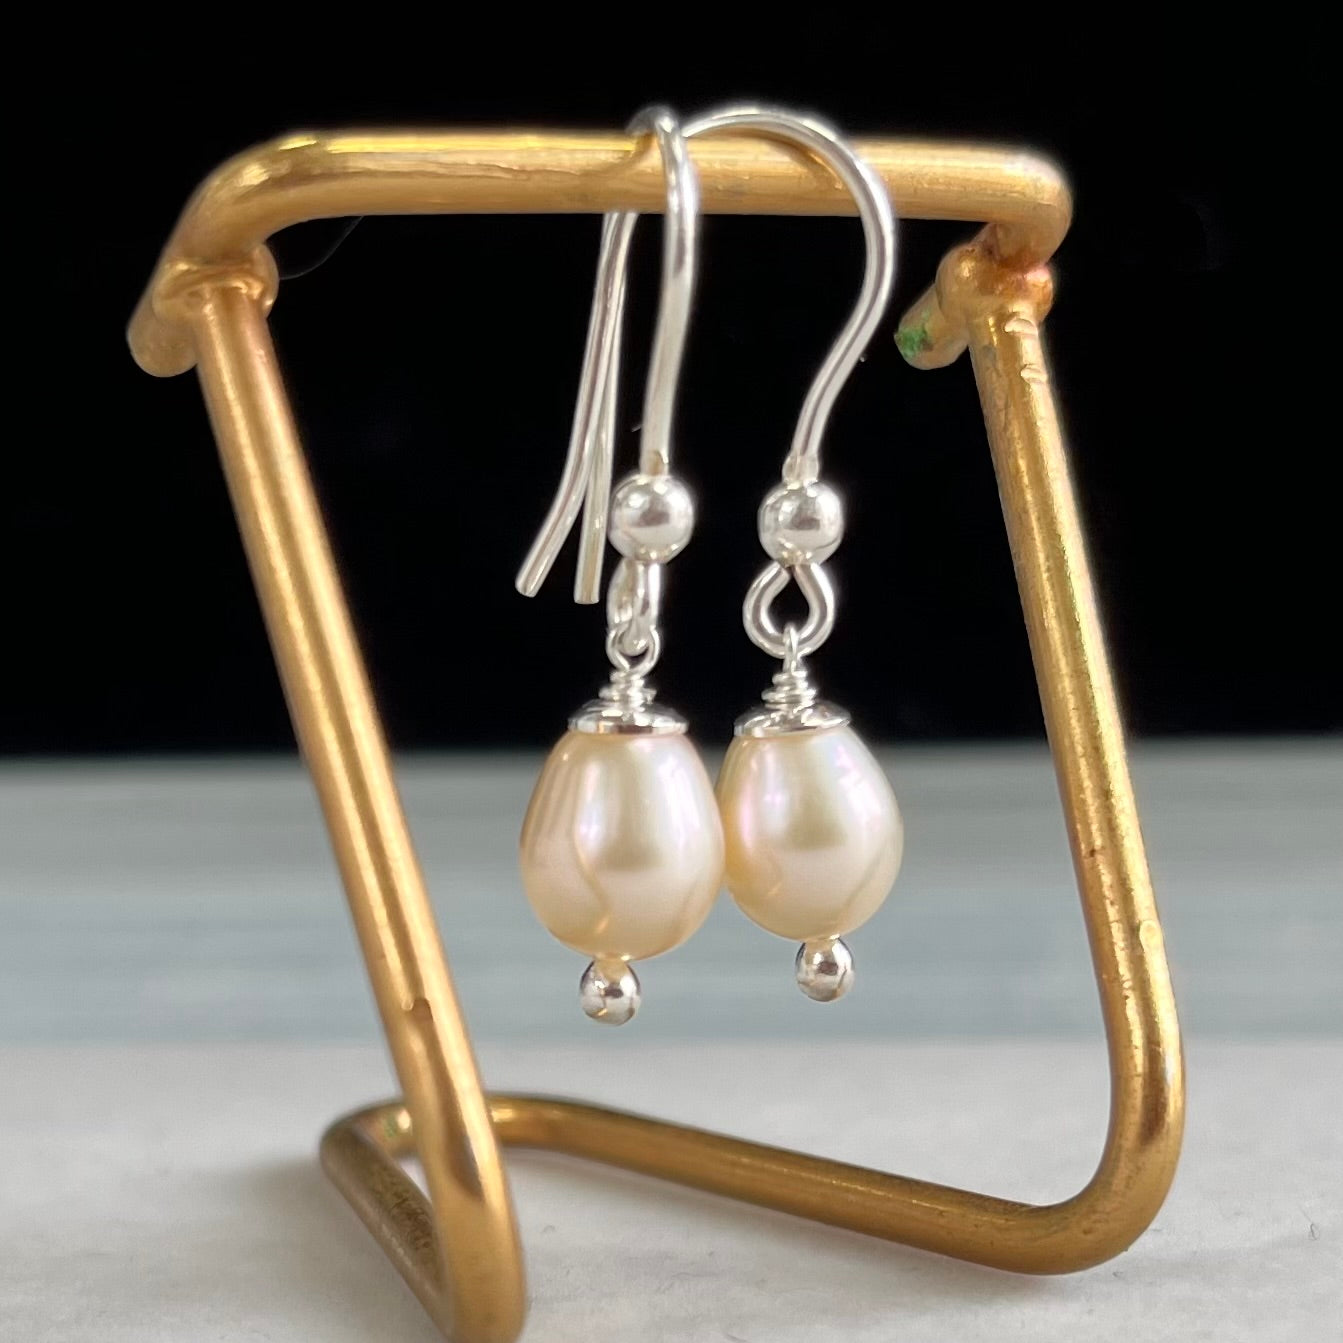 Earrings with pearls, slightly pink color